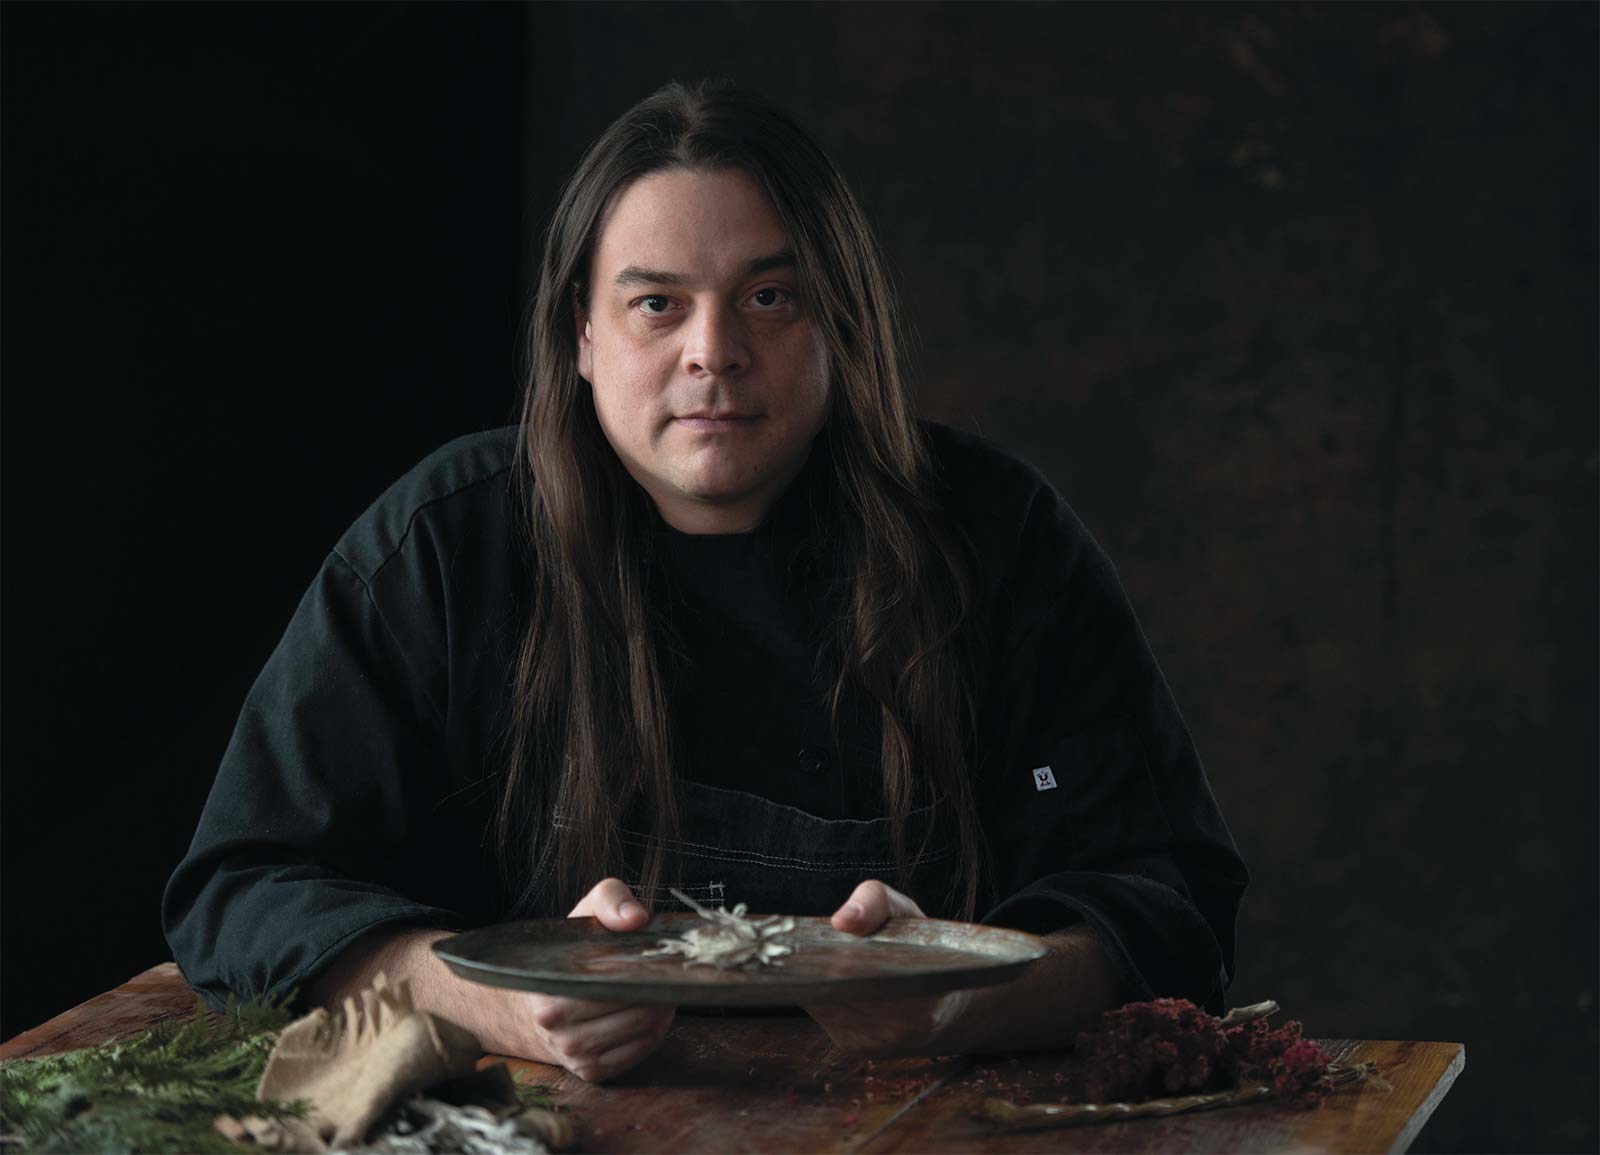 Chef Sean Sherman, a member of the Oglala Lakota subtribe of the Great Sioux Nation and founder of The Sioux Chef, the Indigenous Food Lab and the nonprofit North American Traditional Indigenous Food Systems. photography: Heidi Ehalt Photography